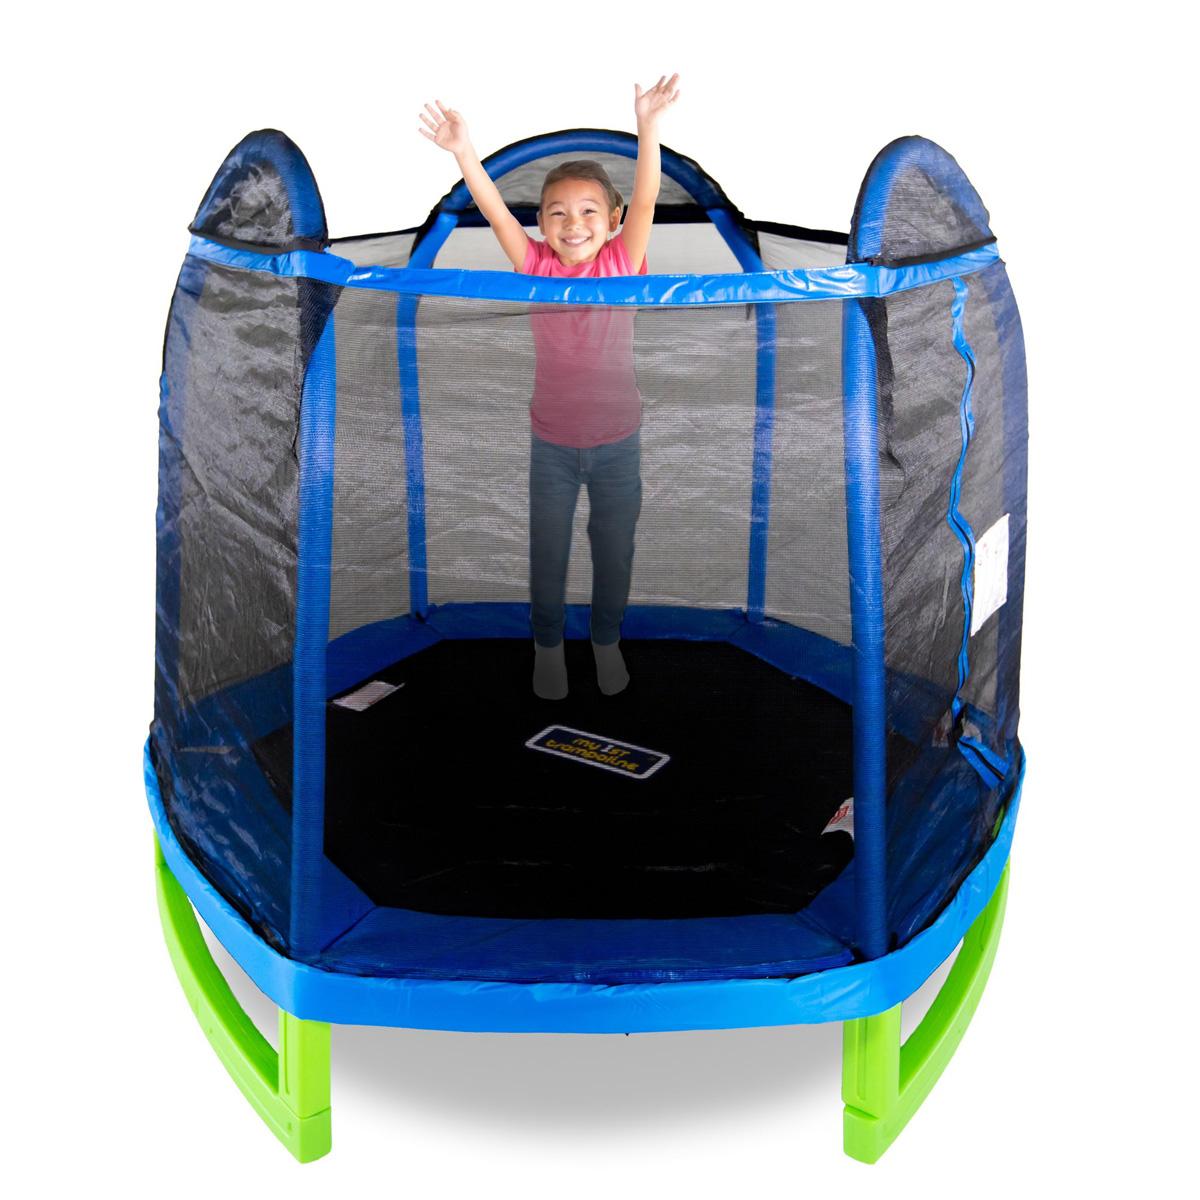 Bounce Pro My First Trampoline Hexagon for $67 Shipped